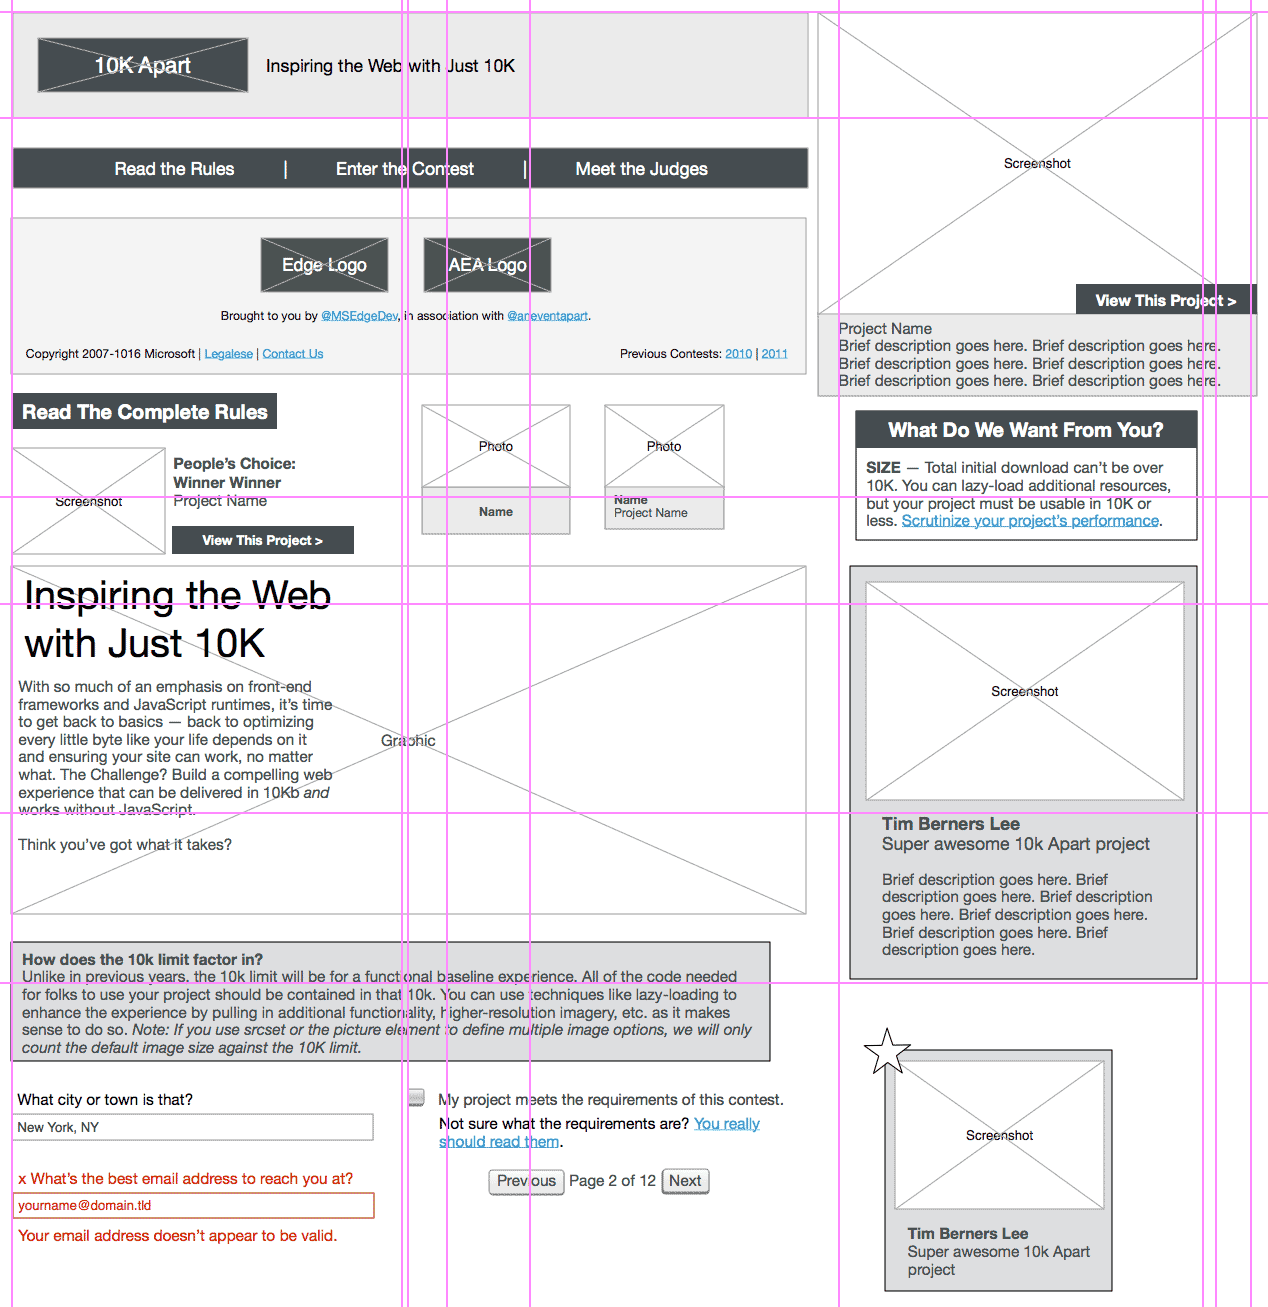 Example wireframe from https://a-k-apart.com